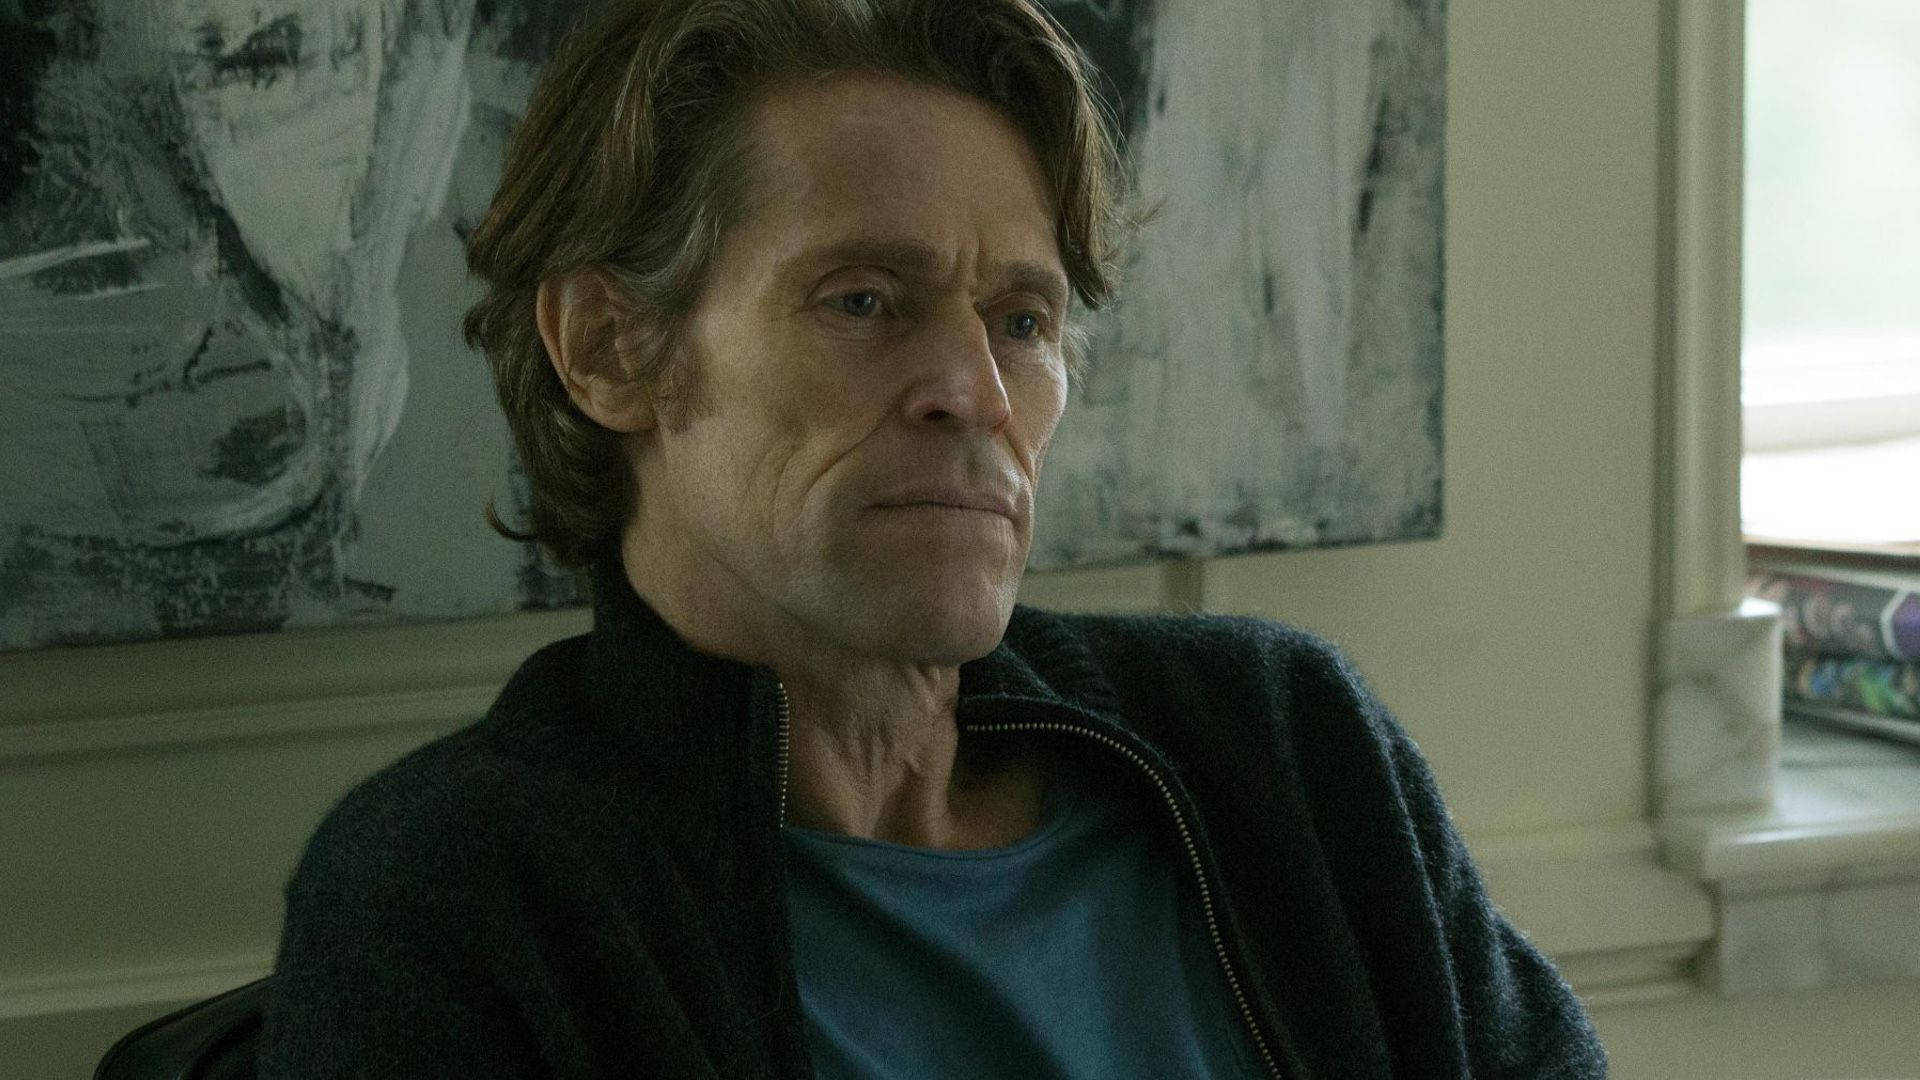 Acclaimed actor Willem Dafoe in a thought-provoking pose Wallpaper